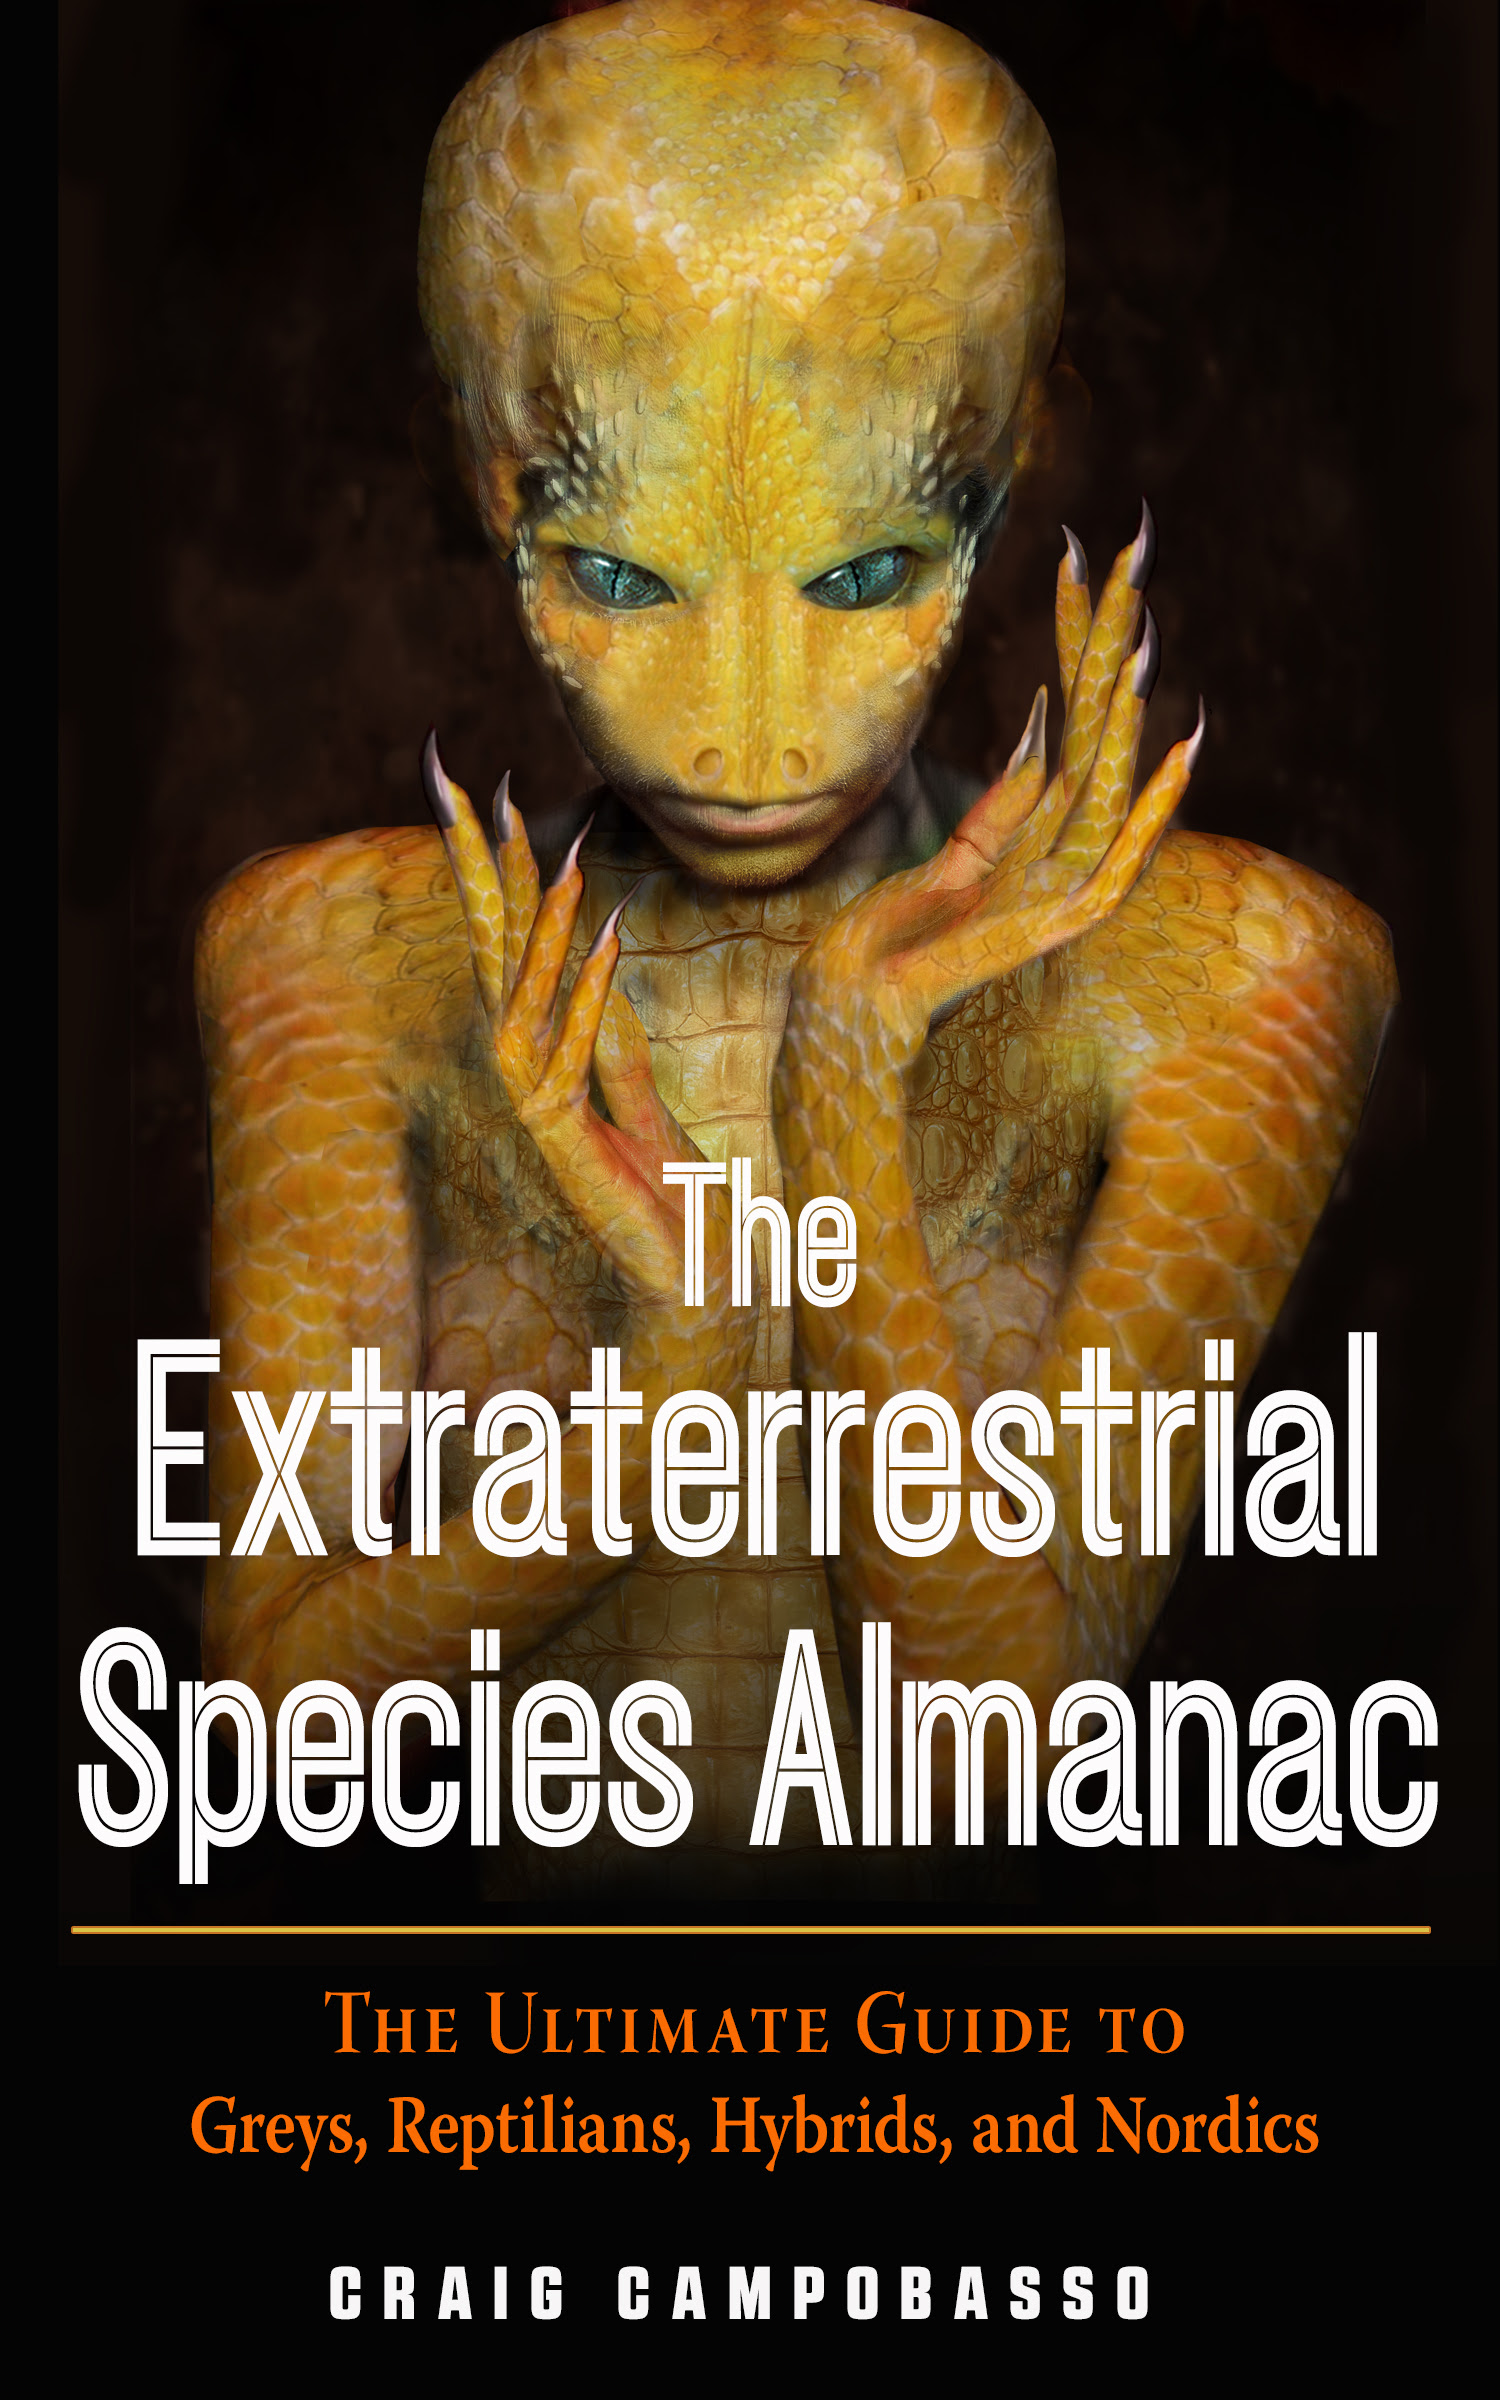 The Extraterrestrial Species Almanac: The Ultimate Guide to Greys, Reptilians, Hybrids, and Nordics EPUB